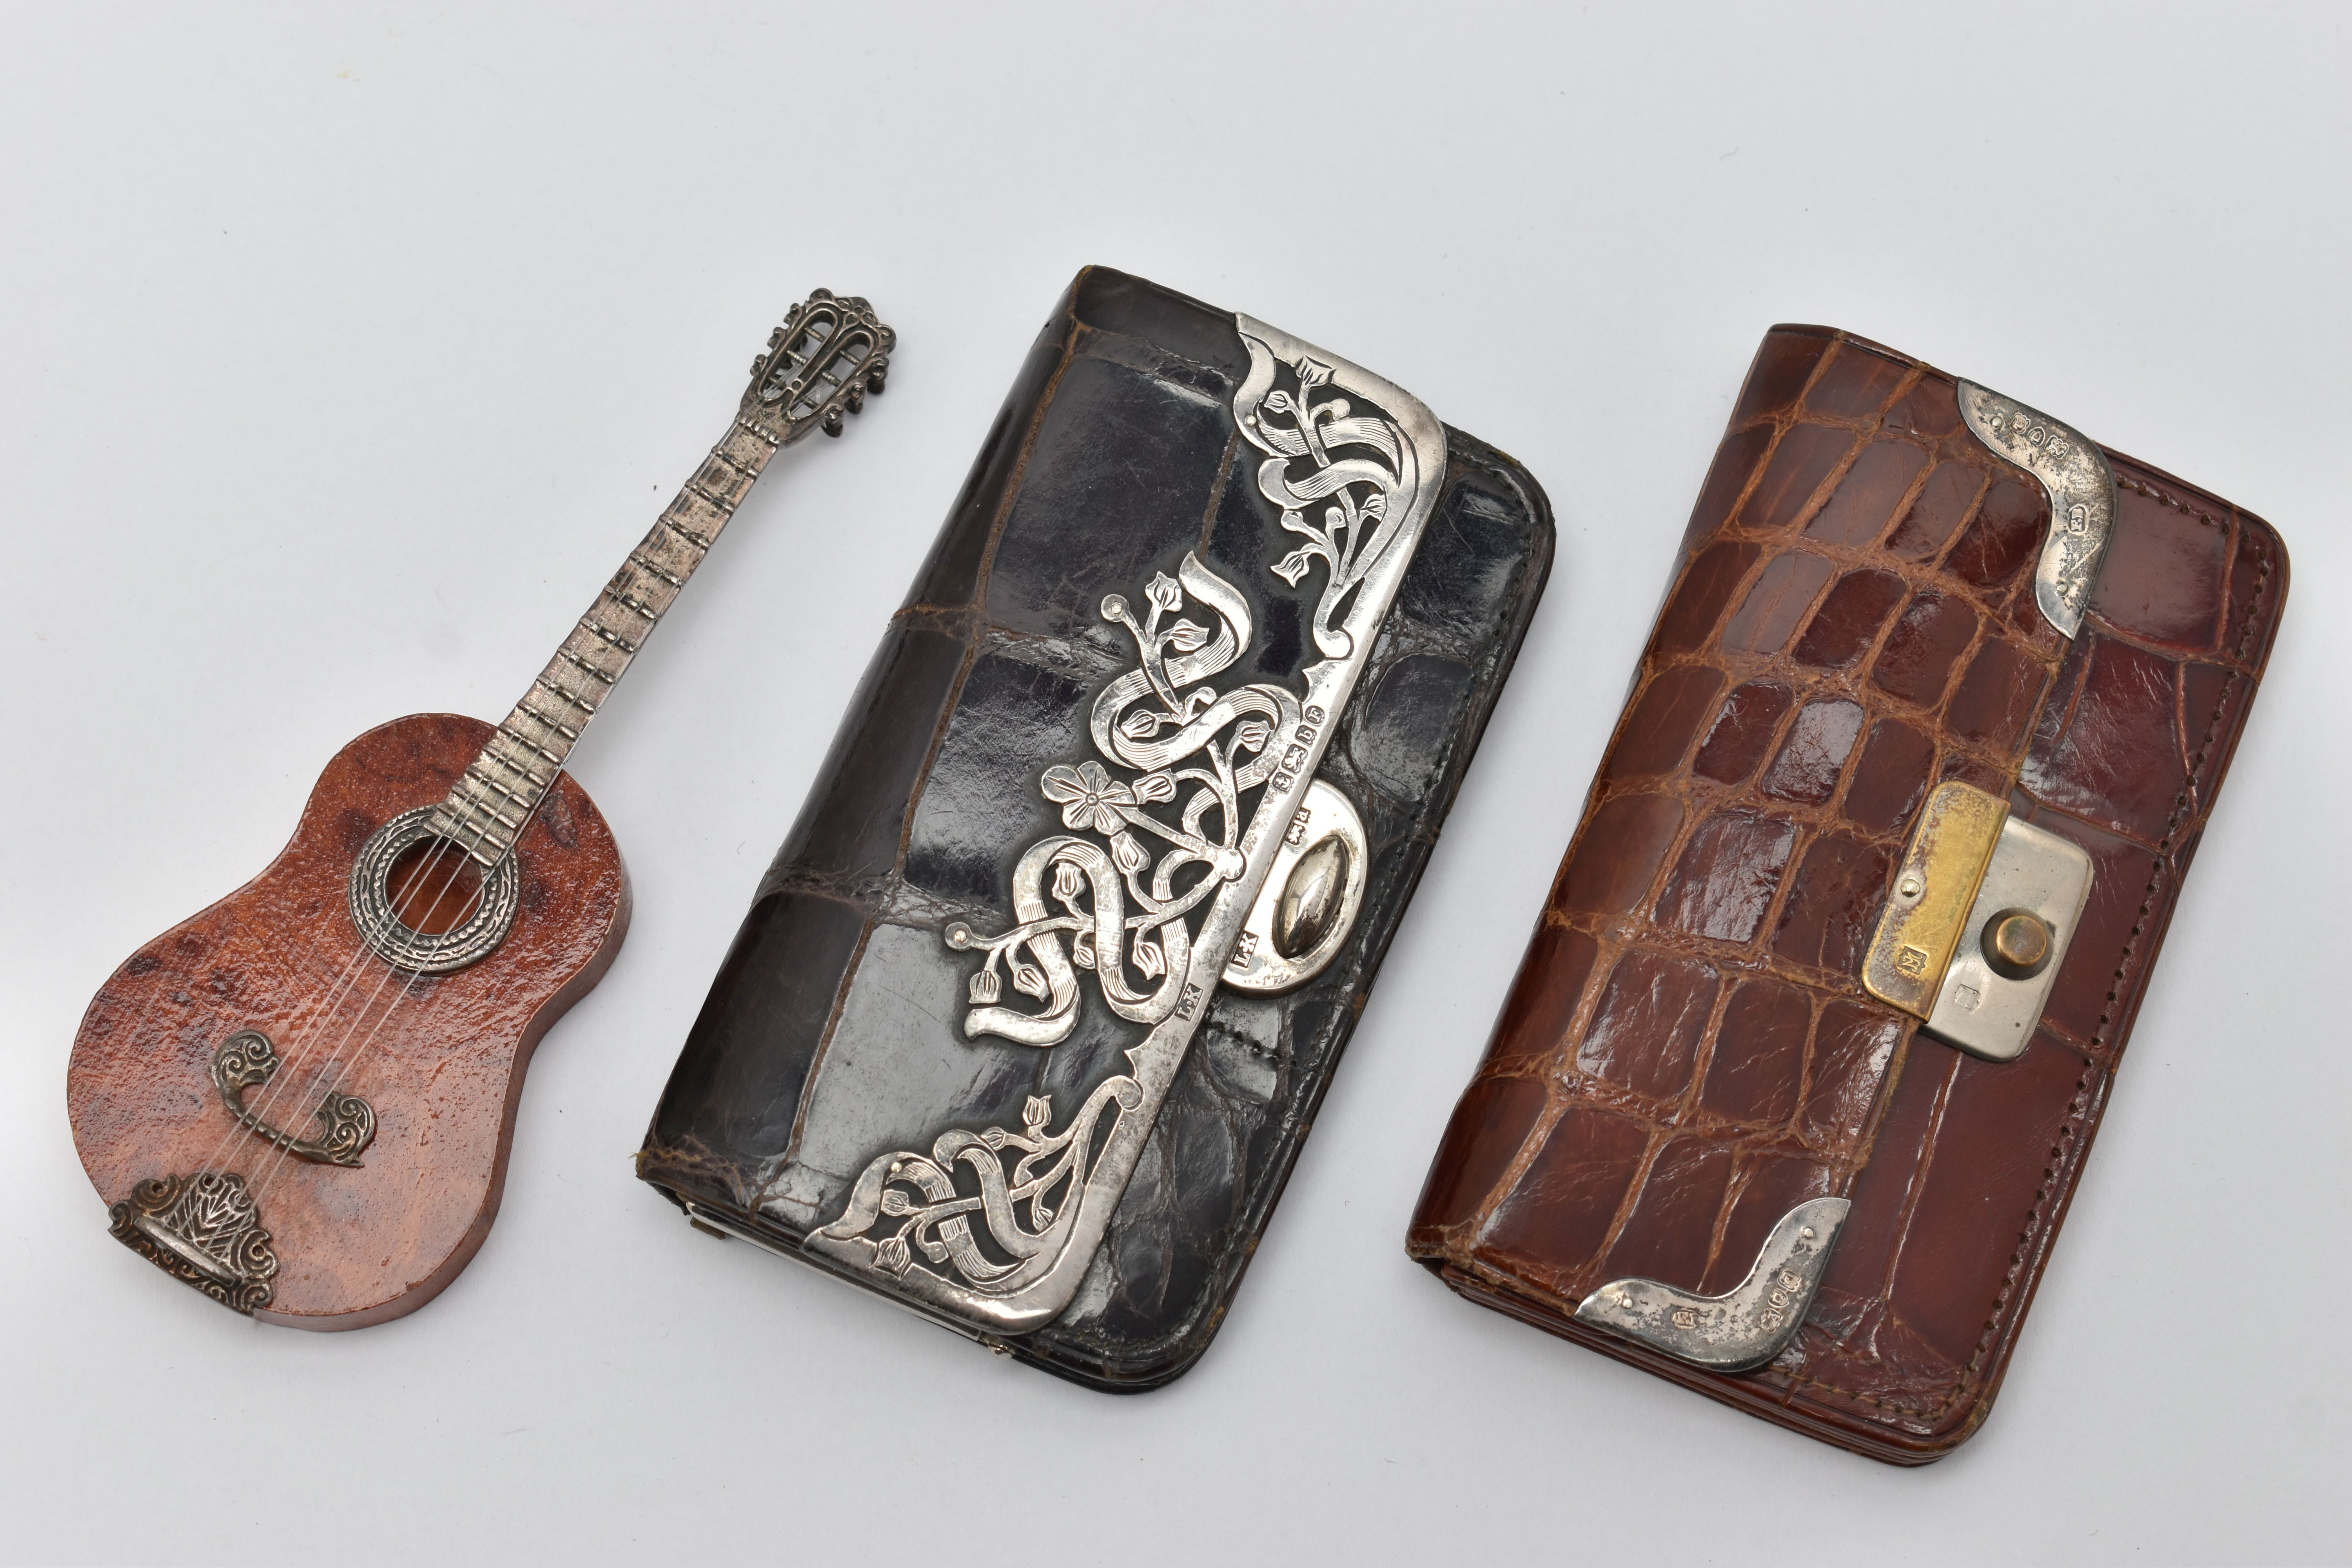 TWO SILVER MOUNTED PURSES AND A MINITURE GUITAR, the first a black croc purse with floral silver